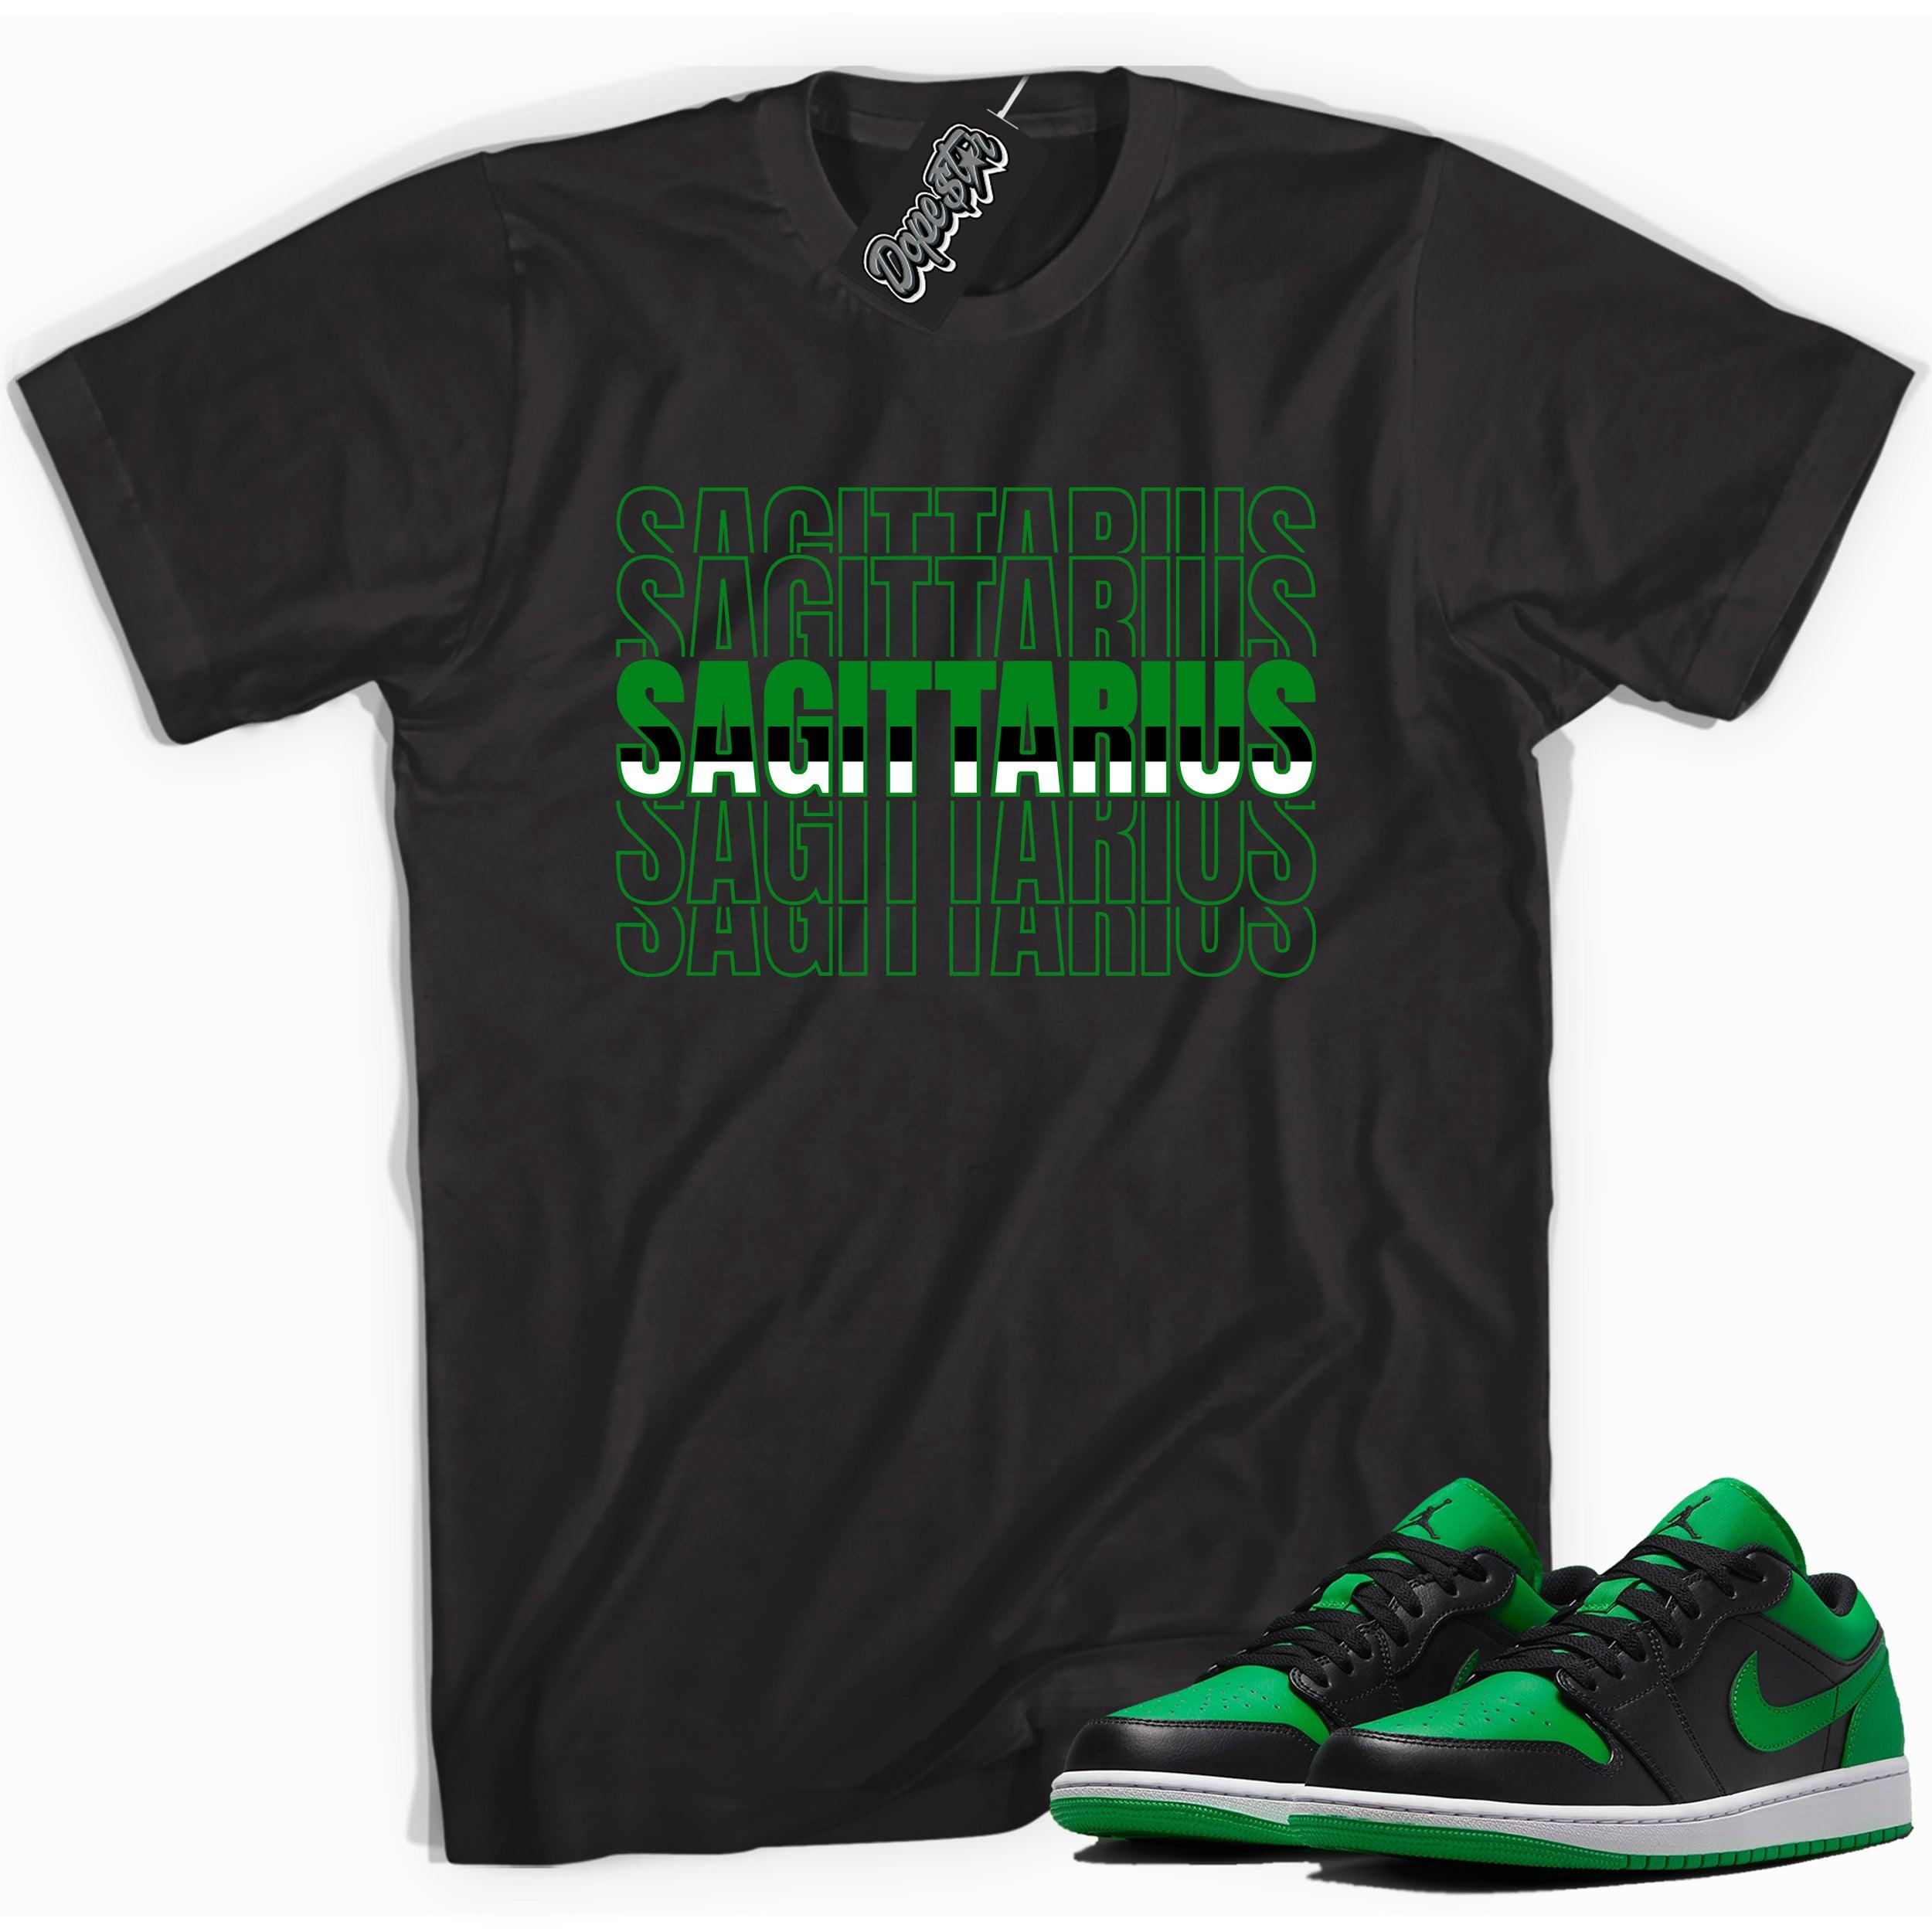 Cool black graphic tee with 'sagittarius' print, that perfectly matches Air Jordan 1 Low Lucky Green sneakers